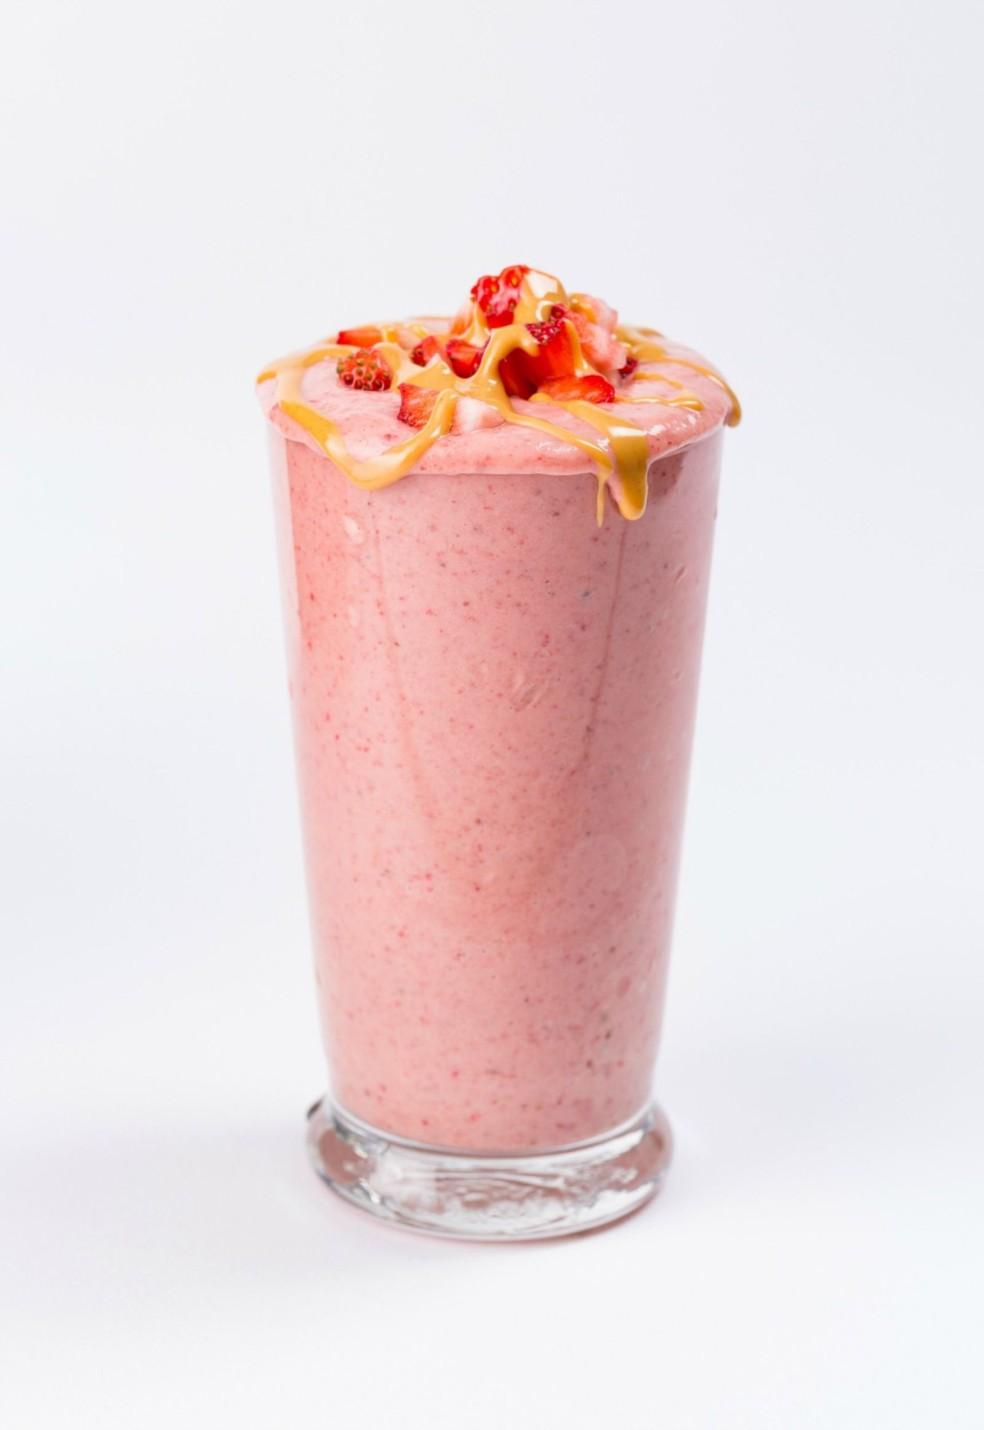 If you thought peanut butter and jam is good in a sandwich - why not try it in smoothie form...?! Ingredients: Strawberries Banana Peanut Butter Milk Directions: 1.